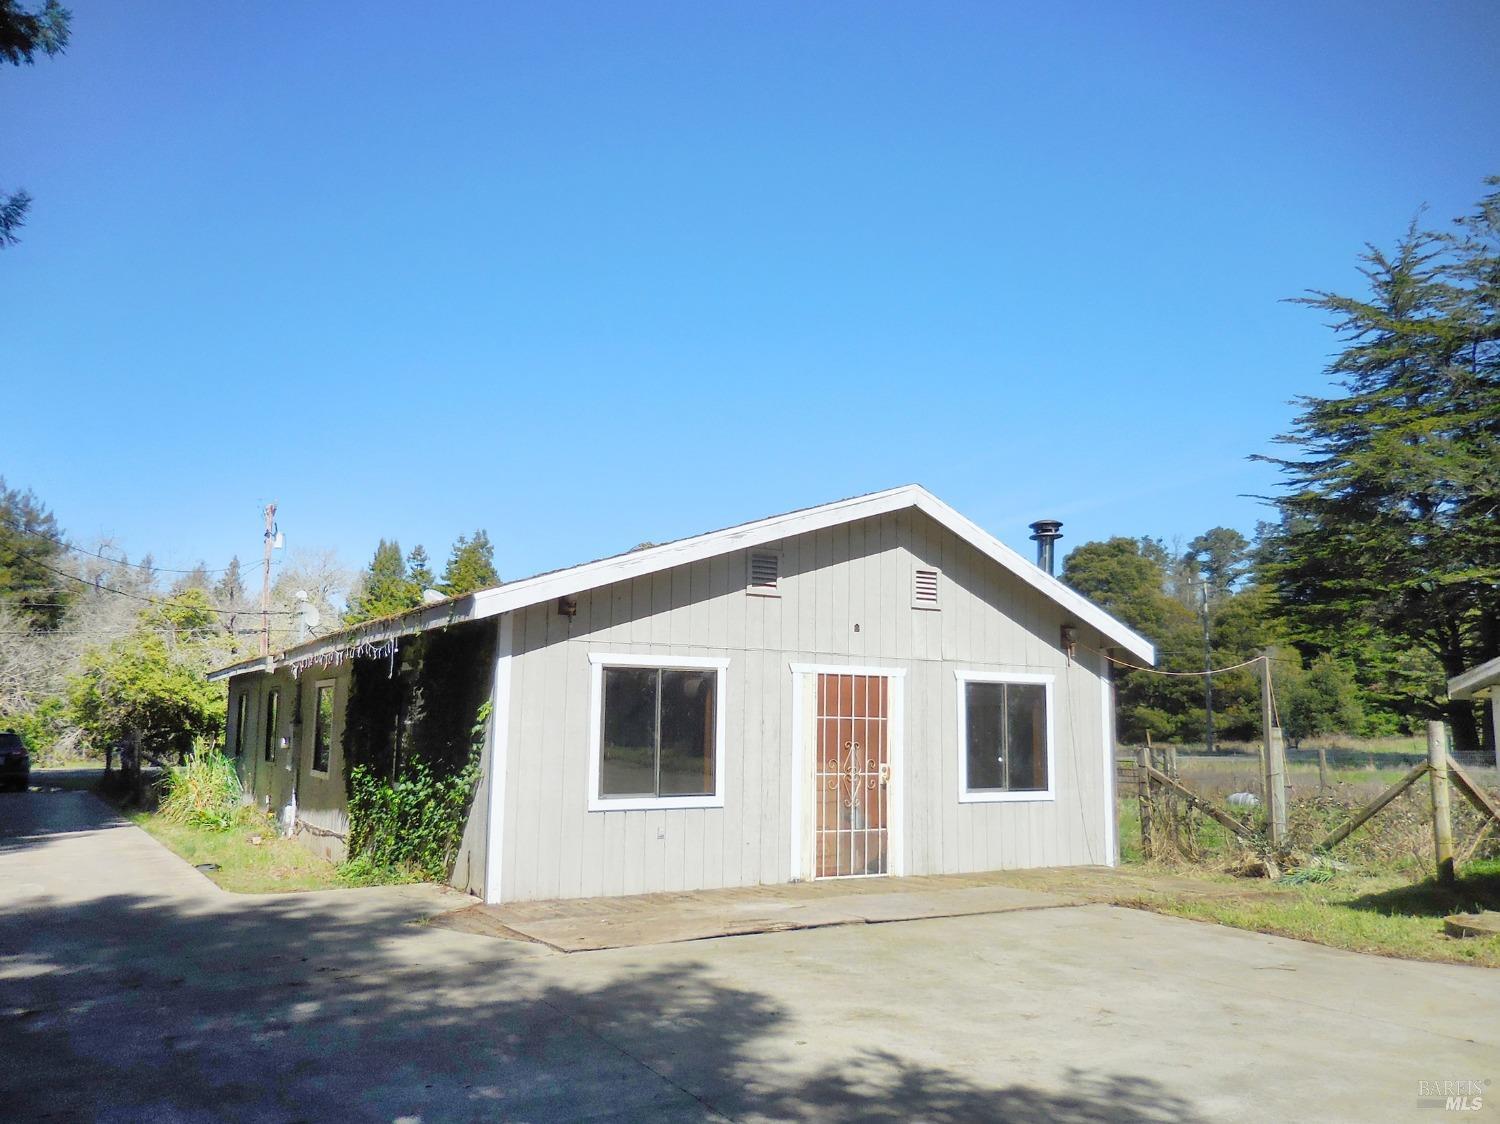 Photo of 31101 Pudding Creek Rd in Fort Bragg, CA